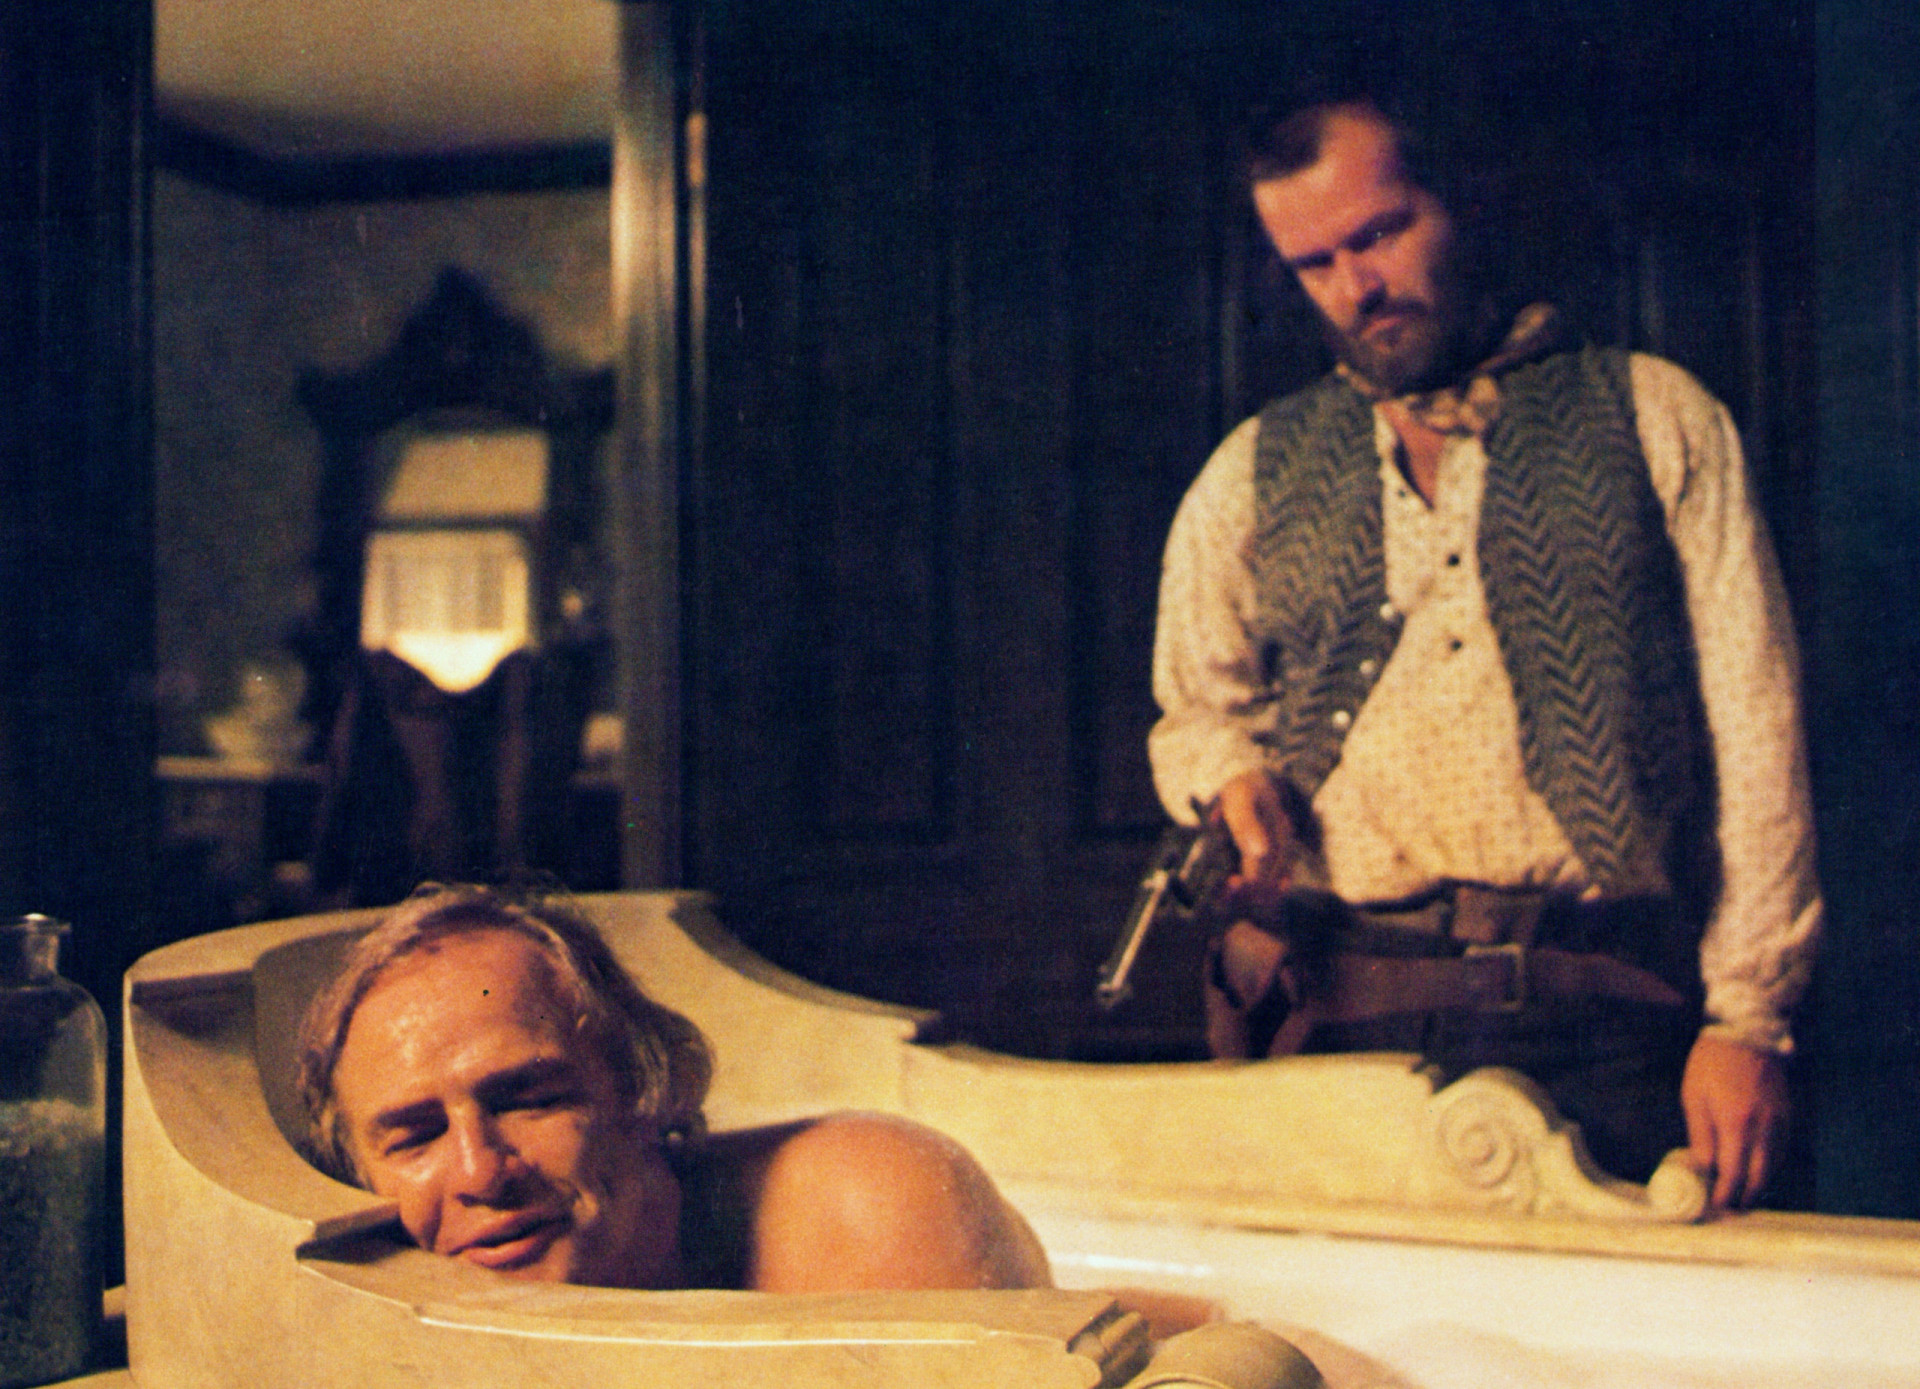 <p>Tom Logan (Jack Nicholson) makes several threats to kill Robert Clayton (Marlon Brando) in this Western, including while Brando's character is taking a bath.</p><p>You may also like:<a href="https://www.starsinsider.com/n/353013?utm_source=msn.com&utm_medium=display&utm_campaign=referral_description&utm_content=546036en-en"> World Heritage Sites that could disappear anytime</a></p>